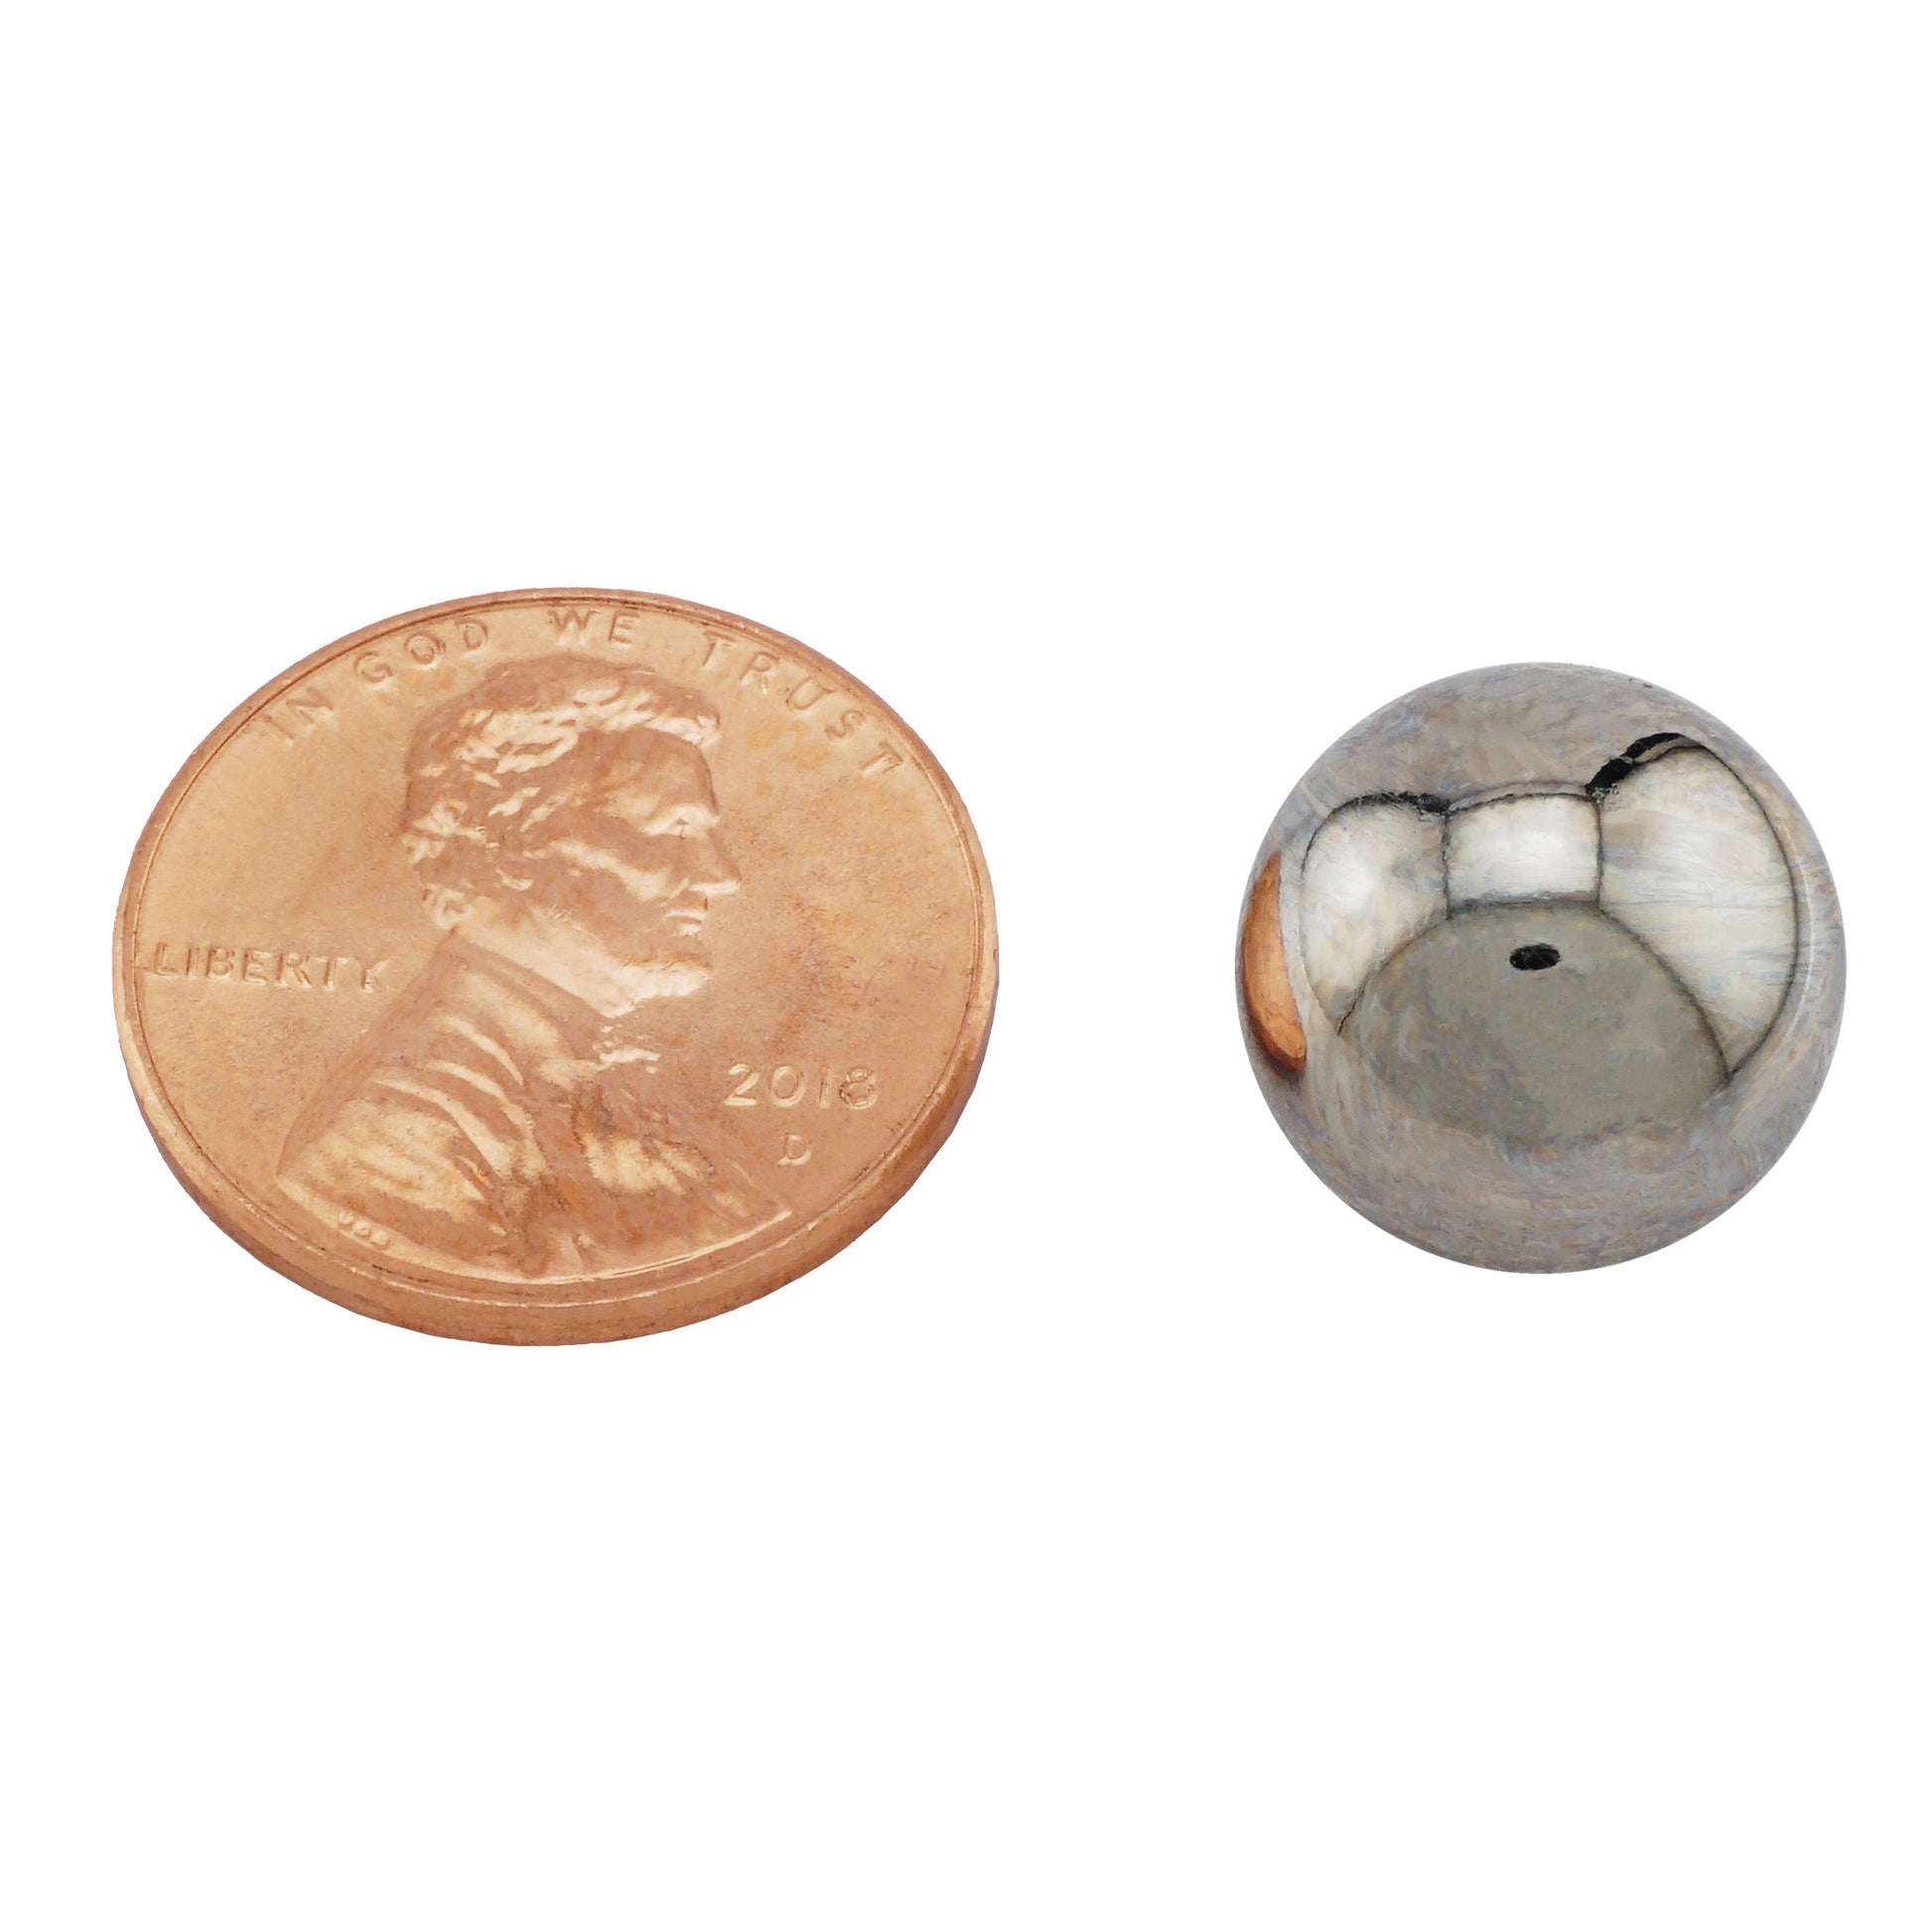 Load image into Gallery viewer, 5XNS50 Neodymium Sphere Magnet - Compared to Penny for Size Reference